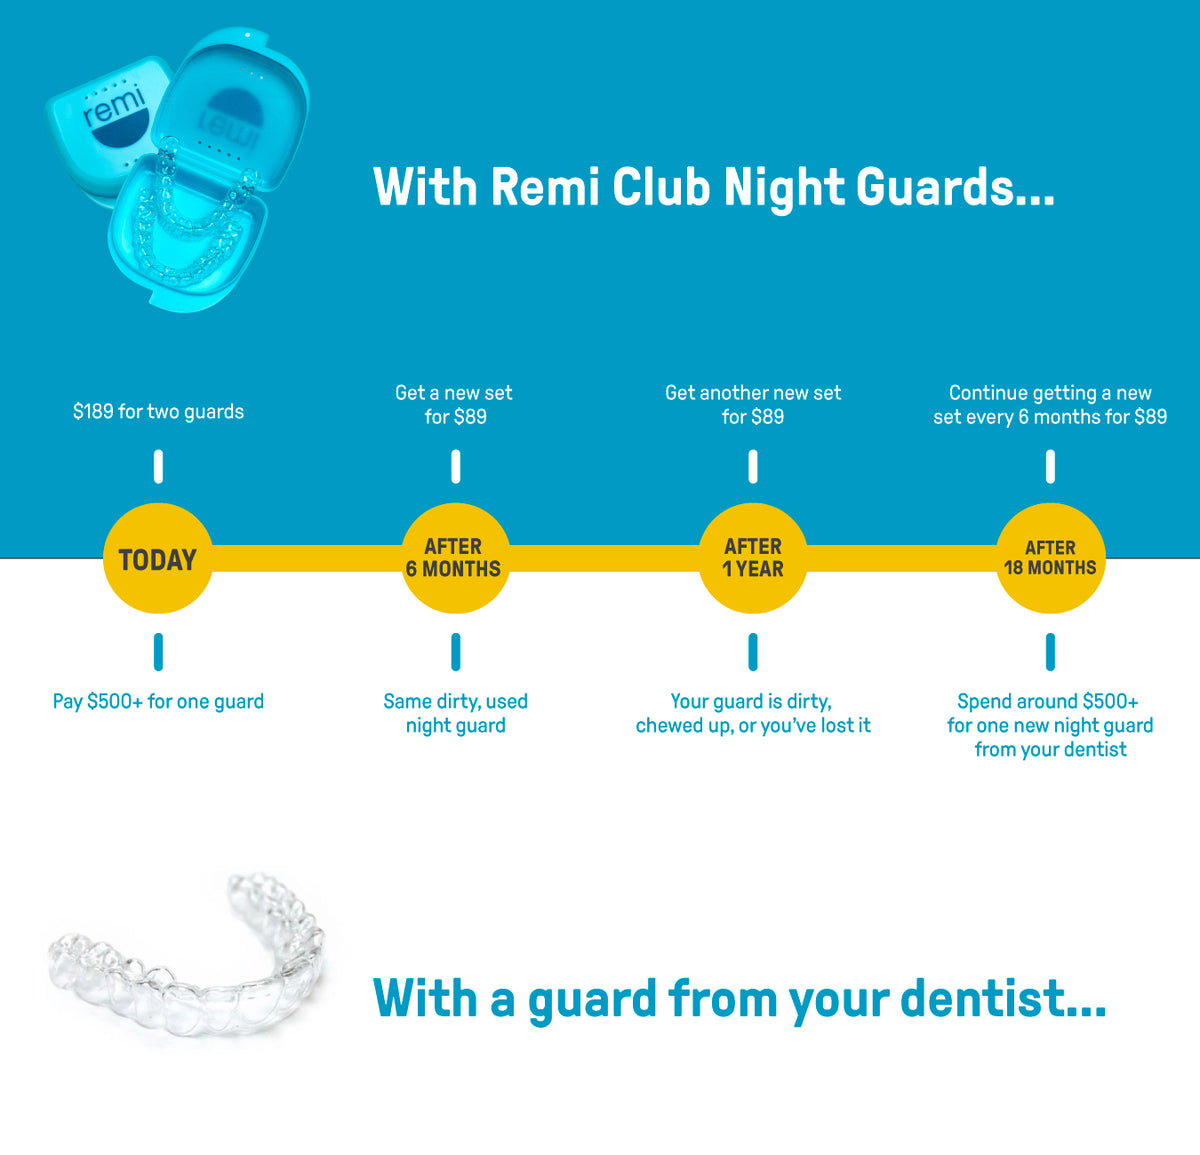 Comparison infographic showing the cost and benefits of Custom Night Guards versus traditional dental guards over 18 months. Custom Night Guards offer new dental-grade night guards at specific intervals for less cost, helping to reduce jaw pain more effectively.